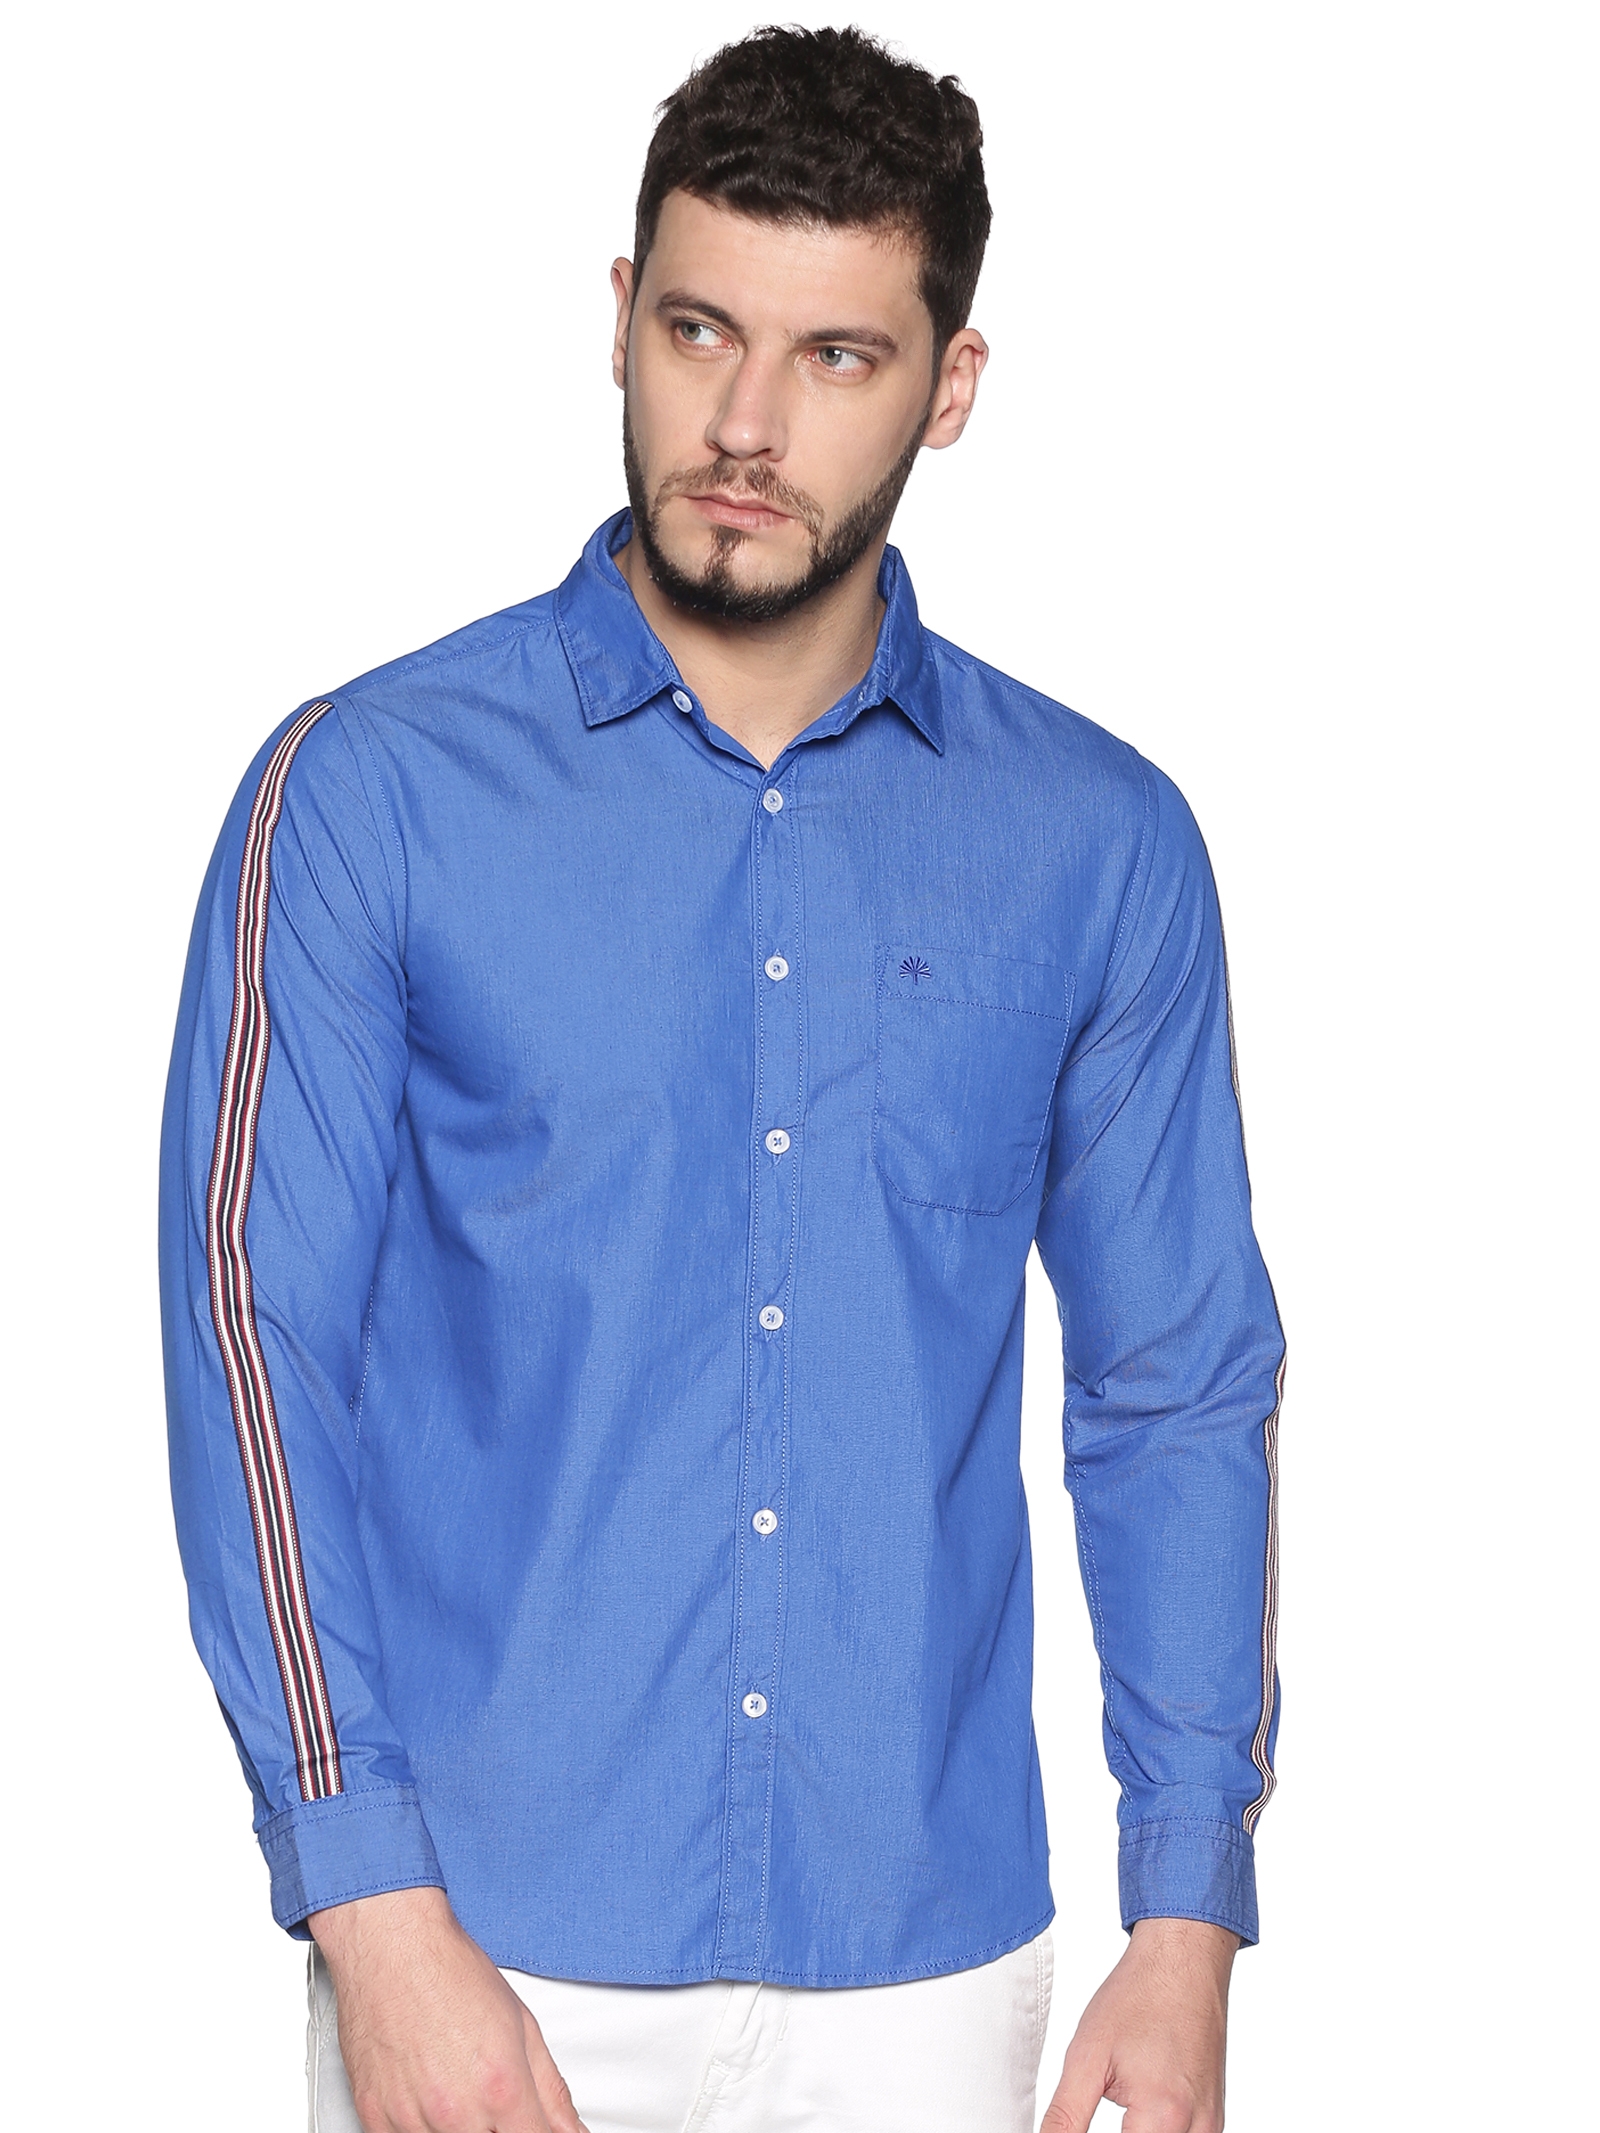 Chennis | Ink Blue Solid Casual Shirts